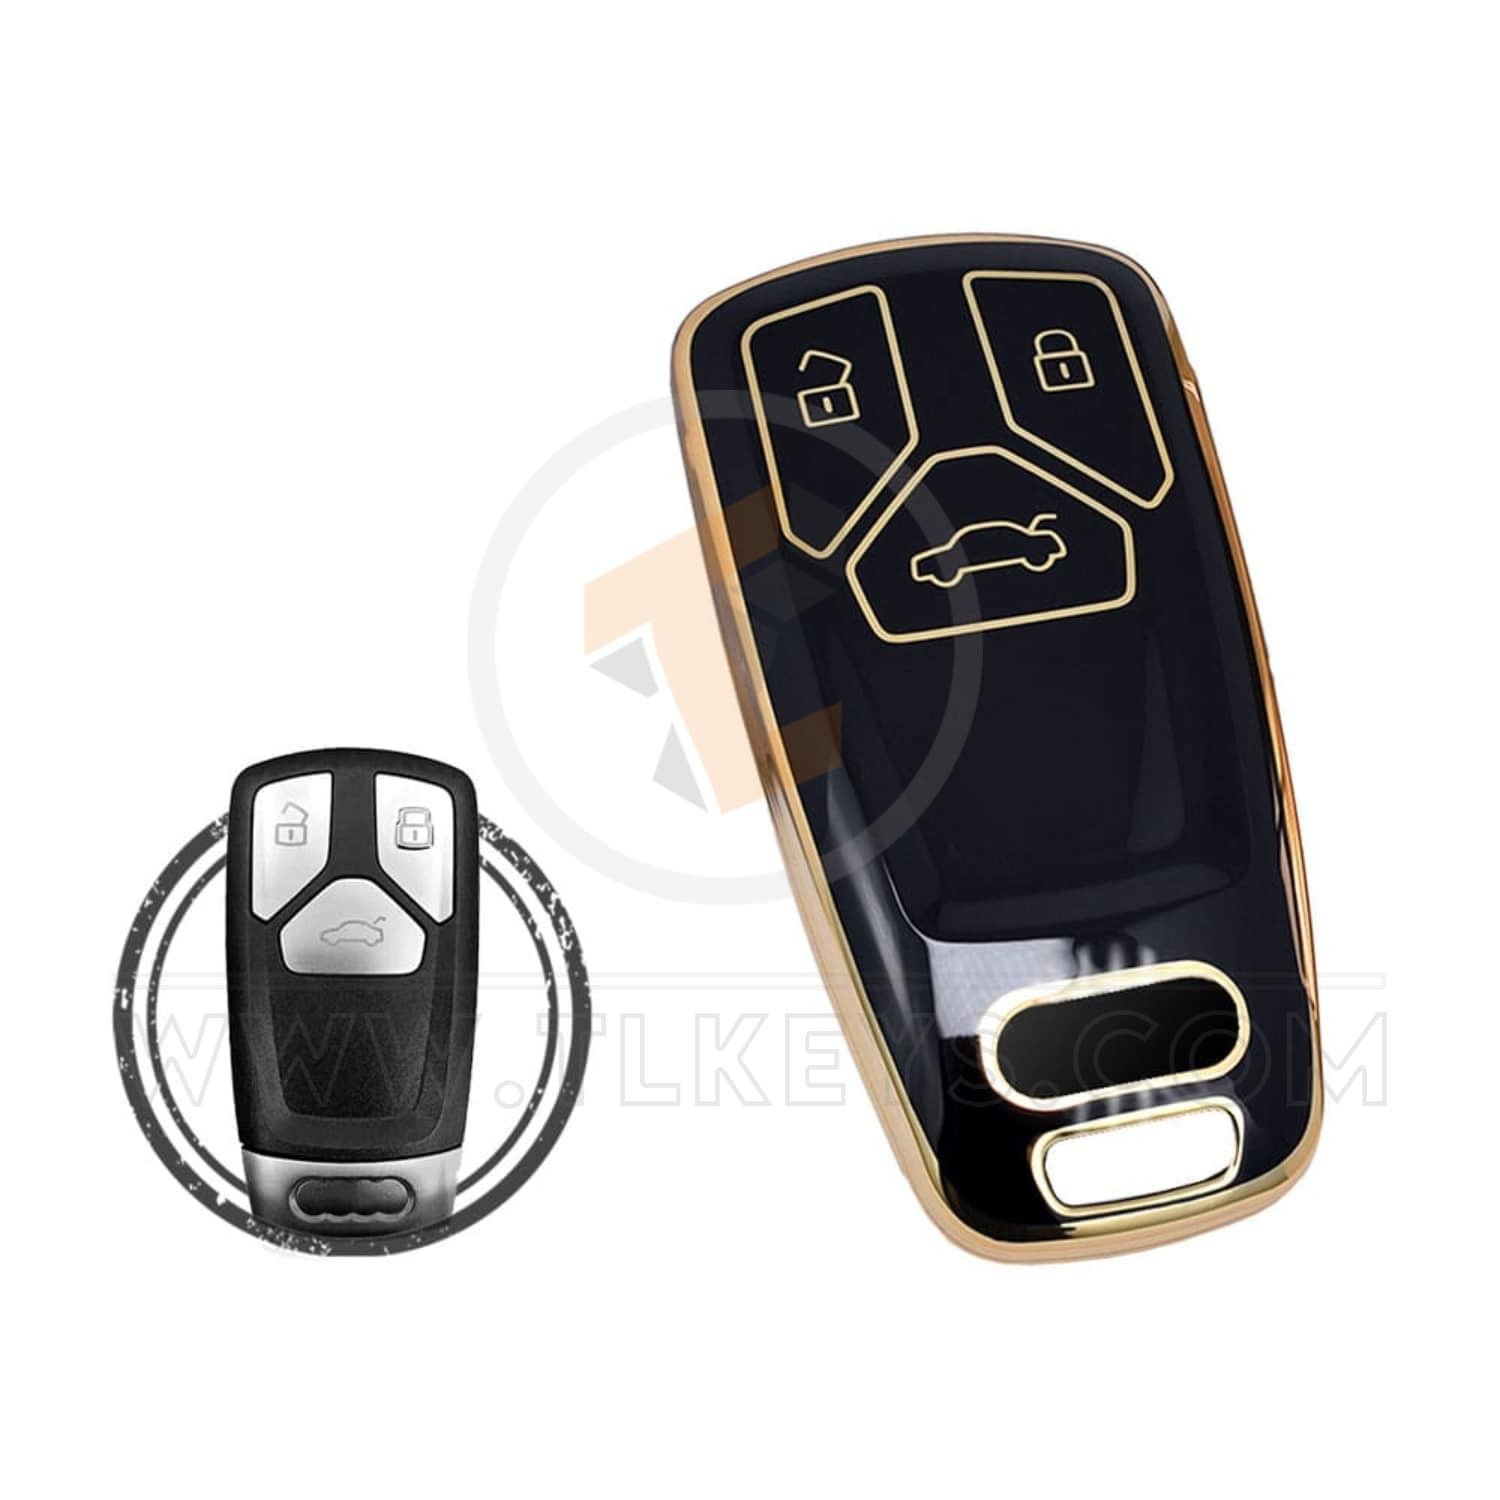 TPU Car Key Cover Case Compatible With Audi TT A4 Status Aftermarket